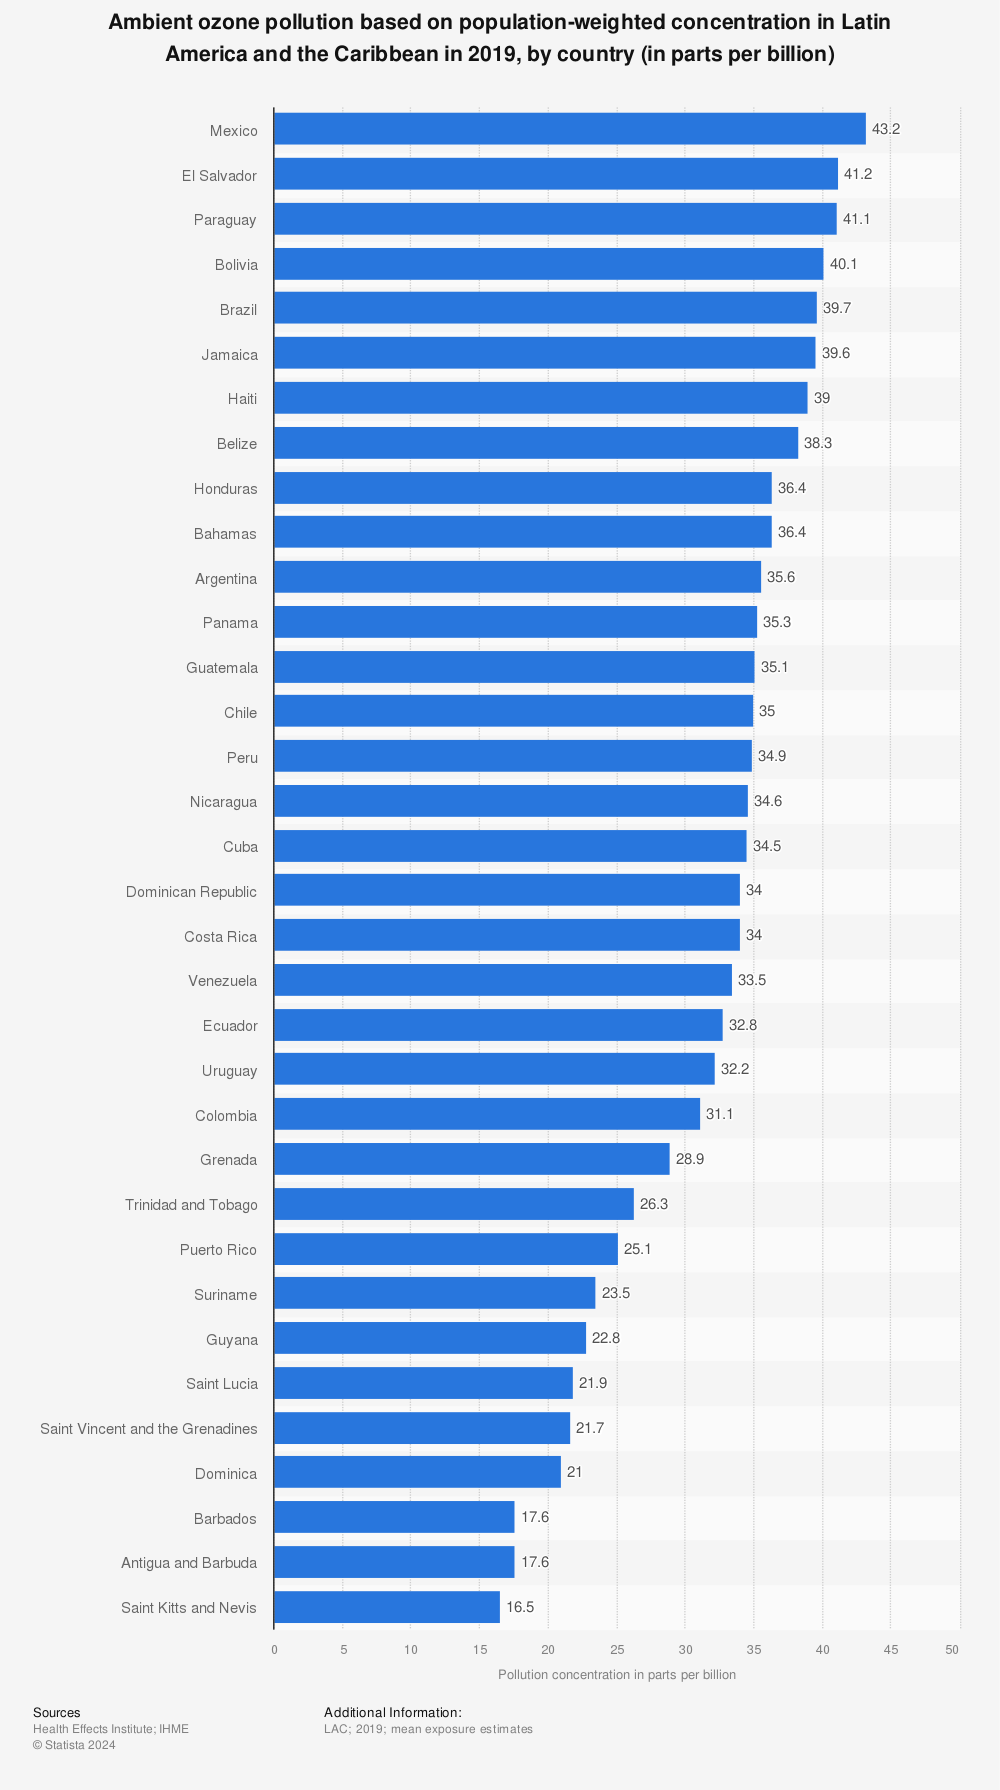 Statistic: Ambient ozone pollution based on population-weighted concentration in Latin America and the Caribbean in 2019, by country (in parts per billion) | Statista